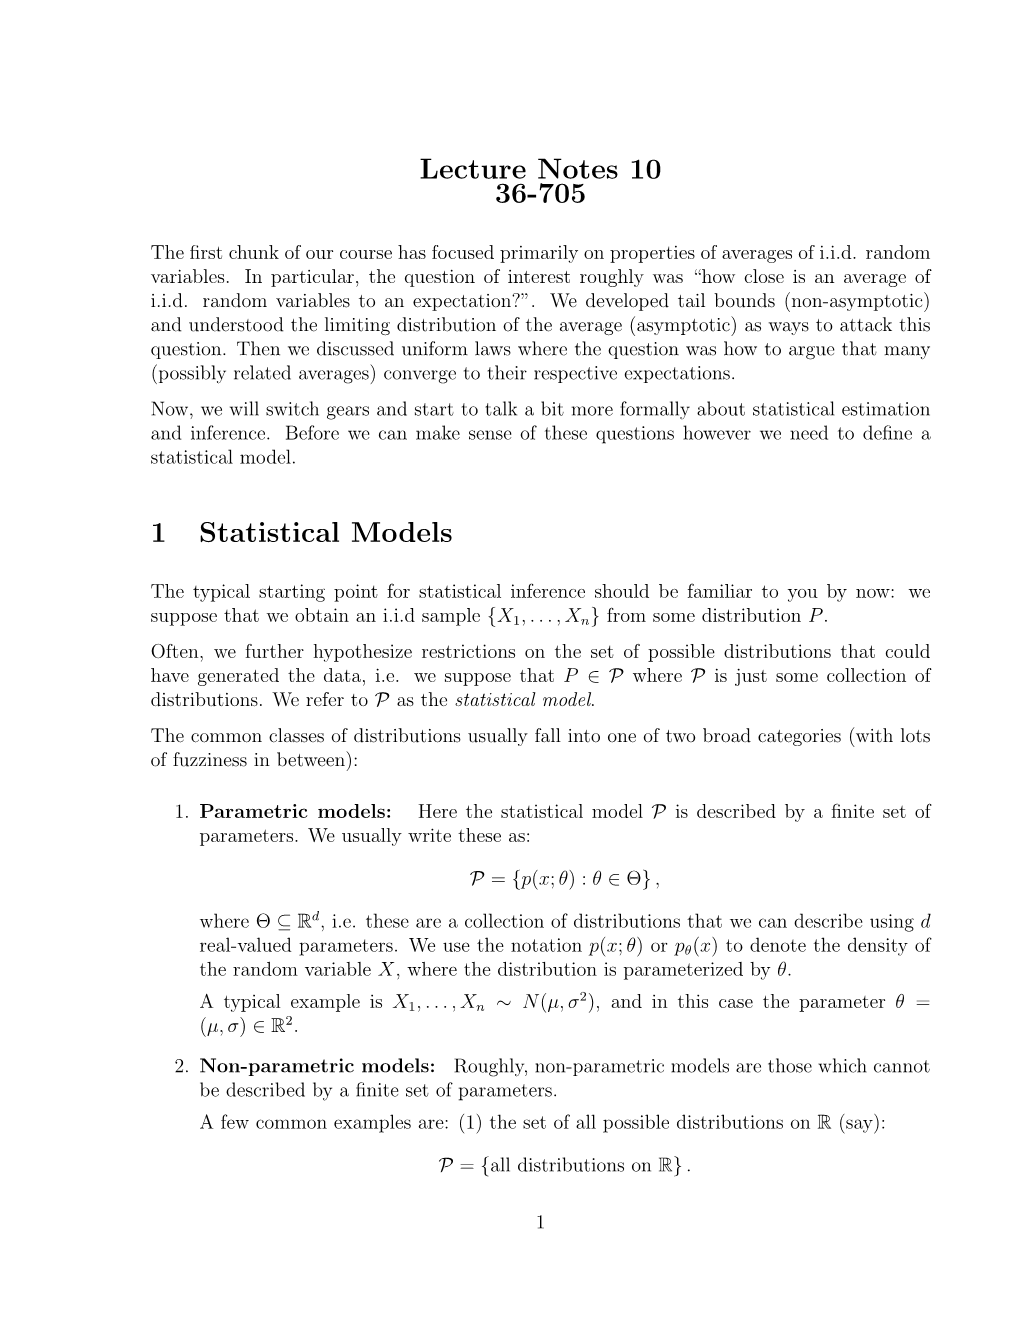 Lecture Notes 10 36-705 1 Statistical Models